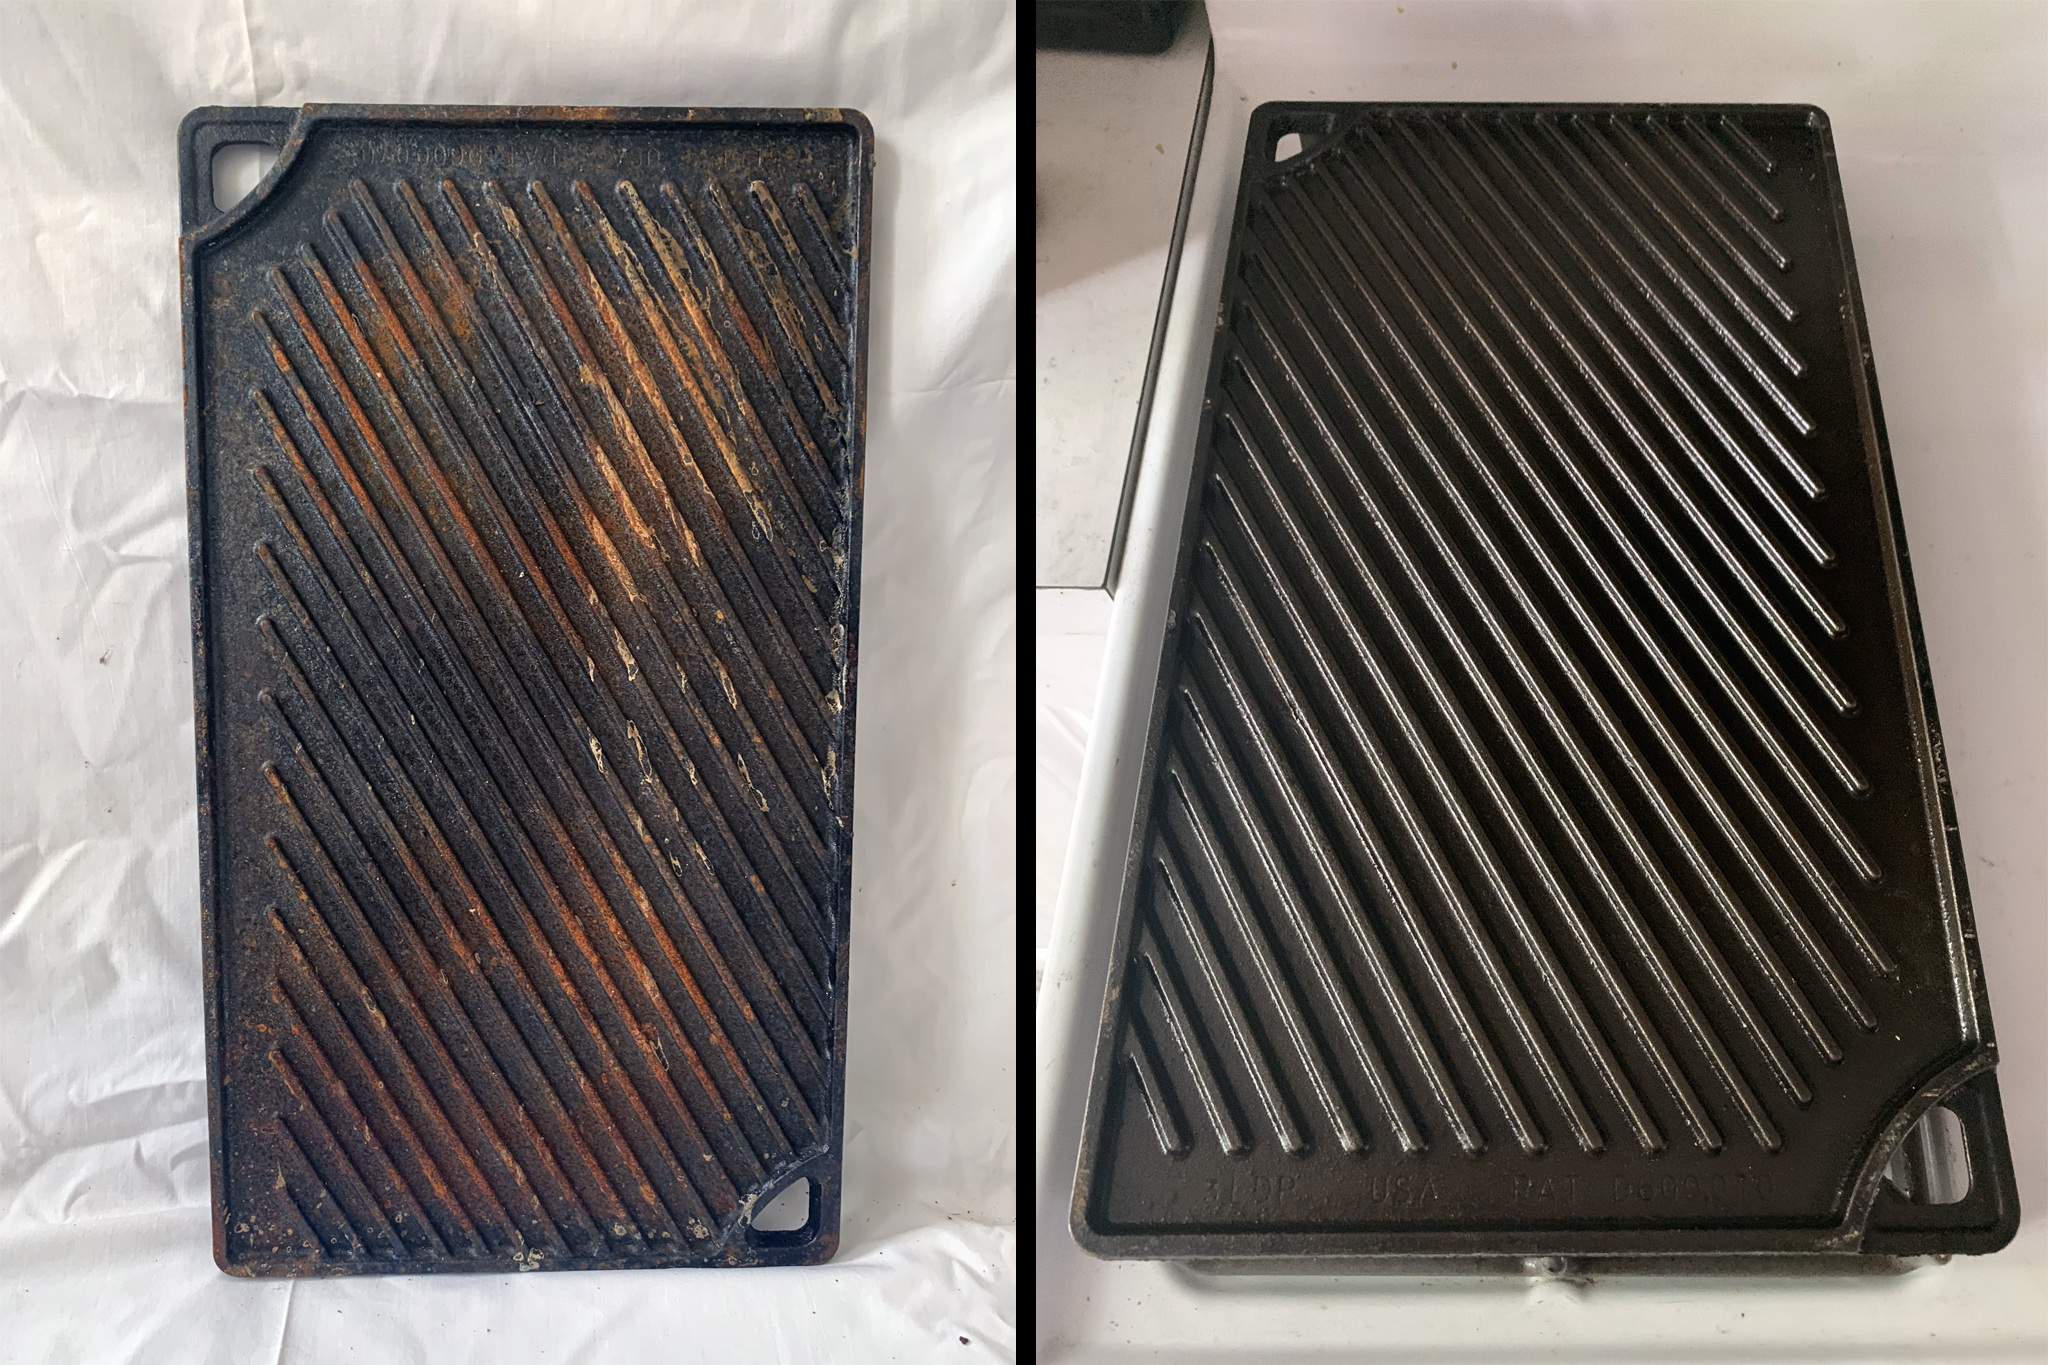 How To Season A Cast Iron Grill Pan Before Use. 